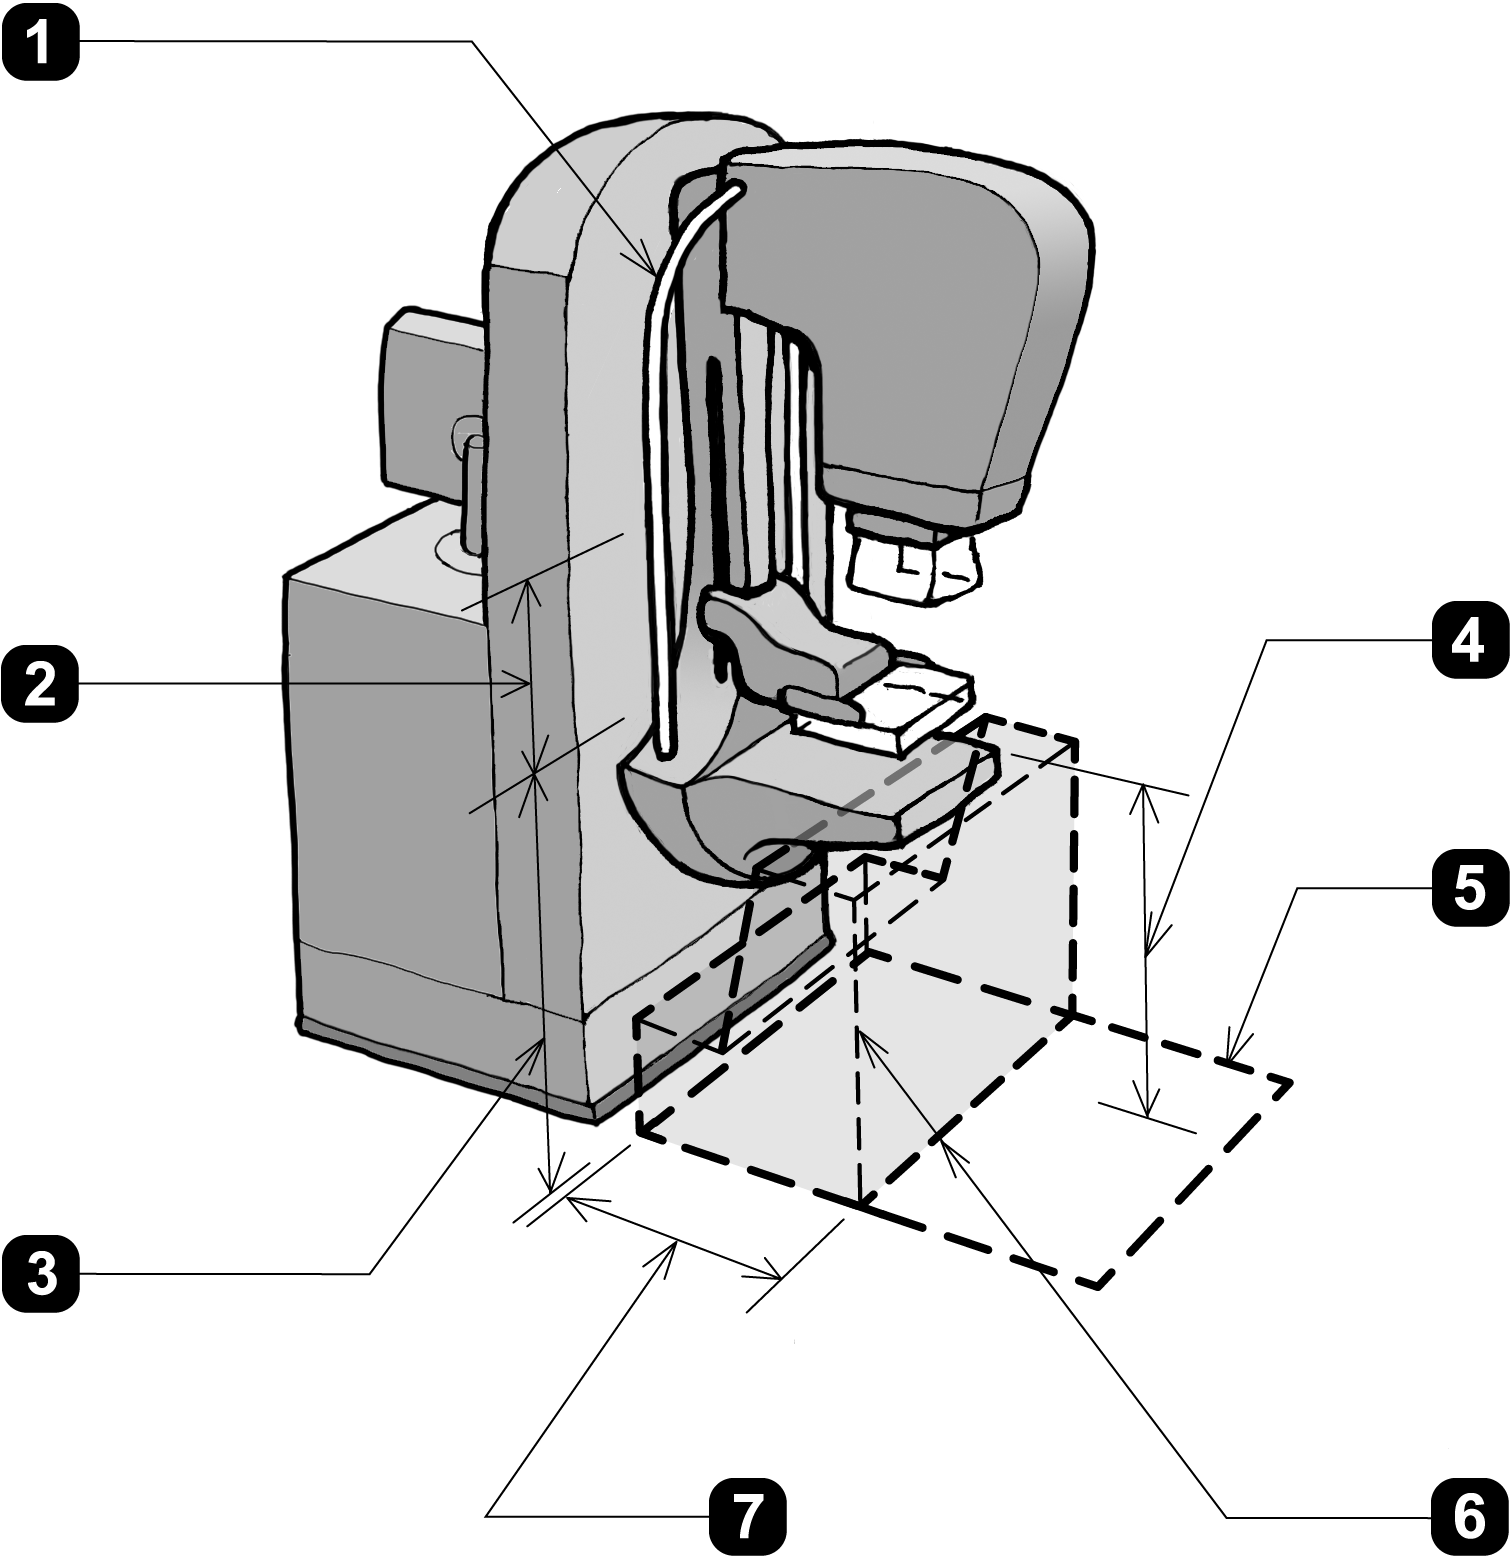 Three-dimensional overview of a mammography machine showing features and minimum dimensions required by the proposed Standards.